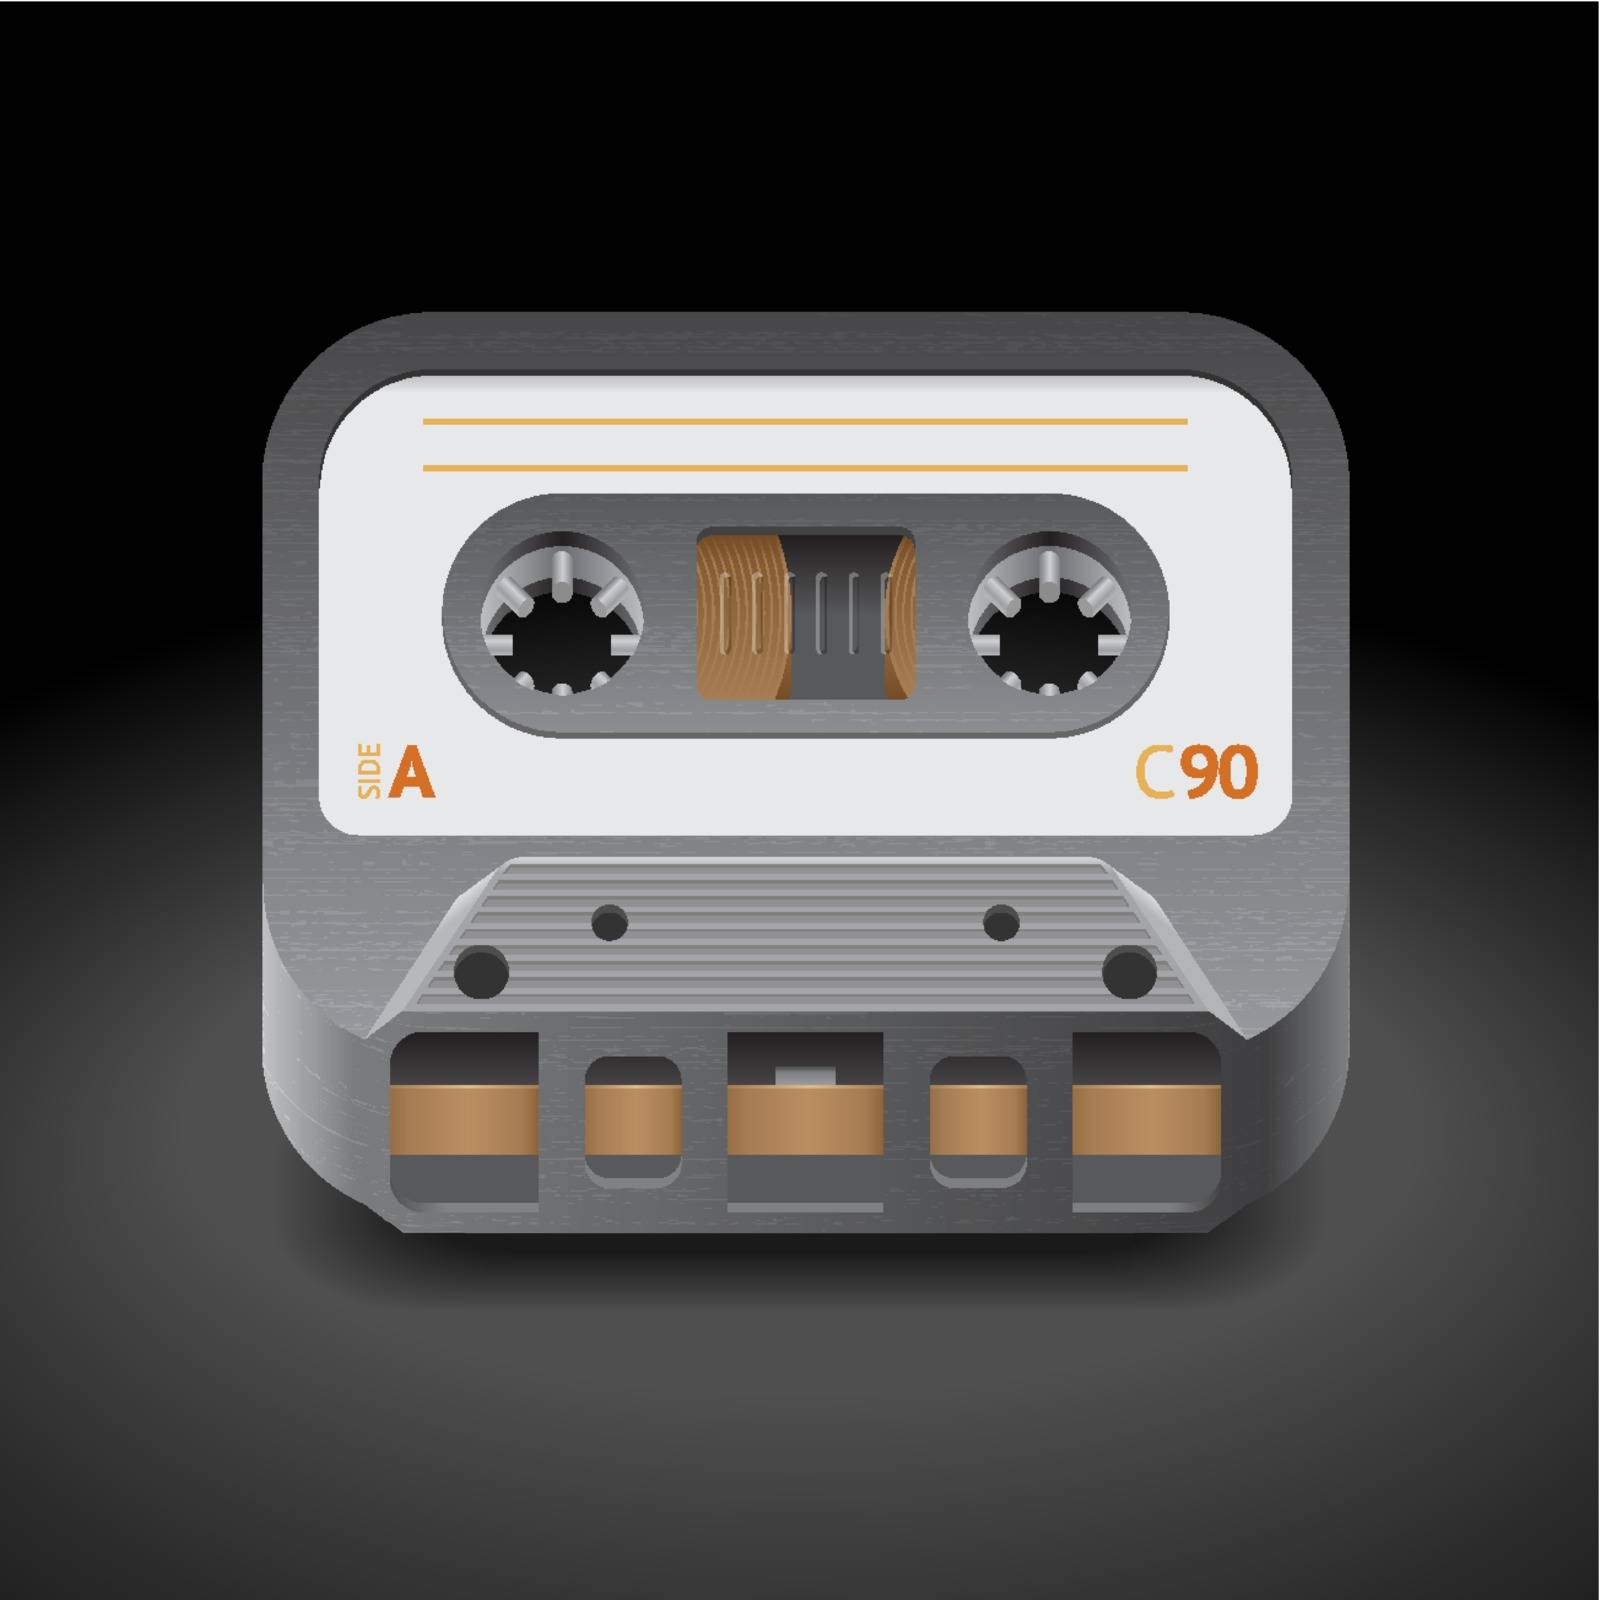 Icon for audio cassette. Dark background. Vector saved as eps-10, file contains objects with transparency.